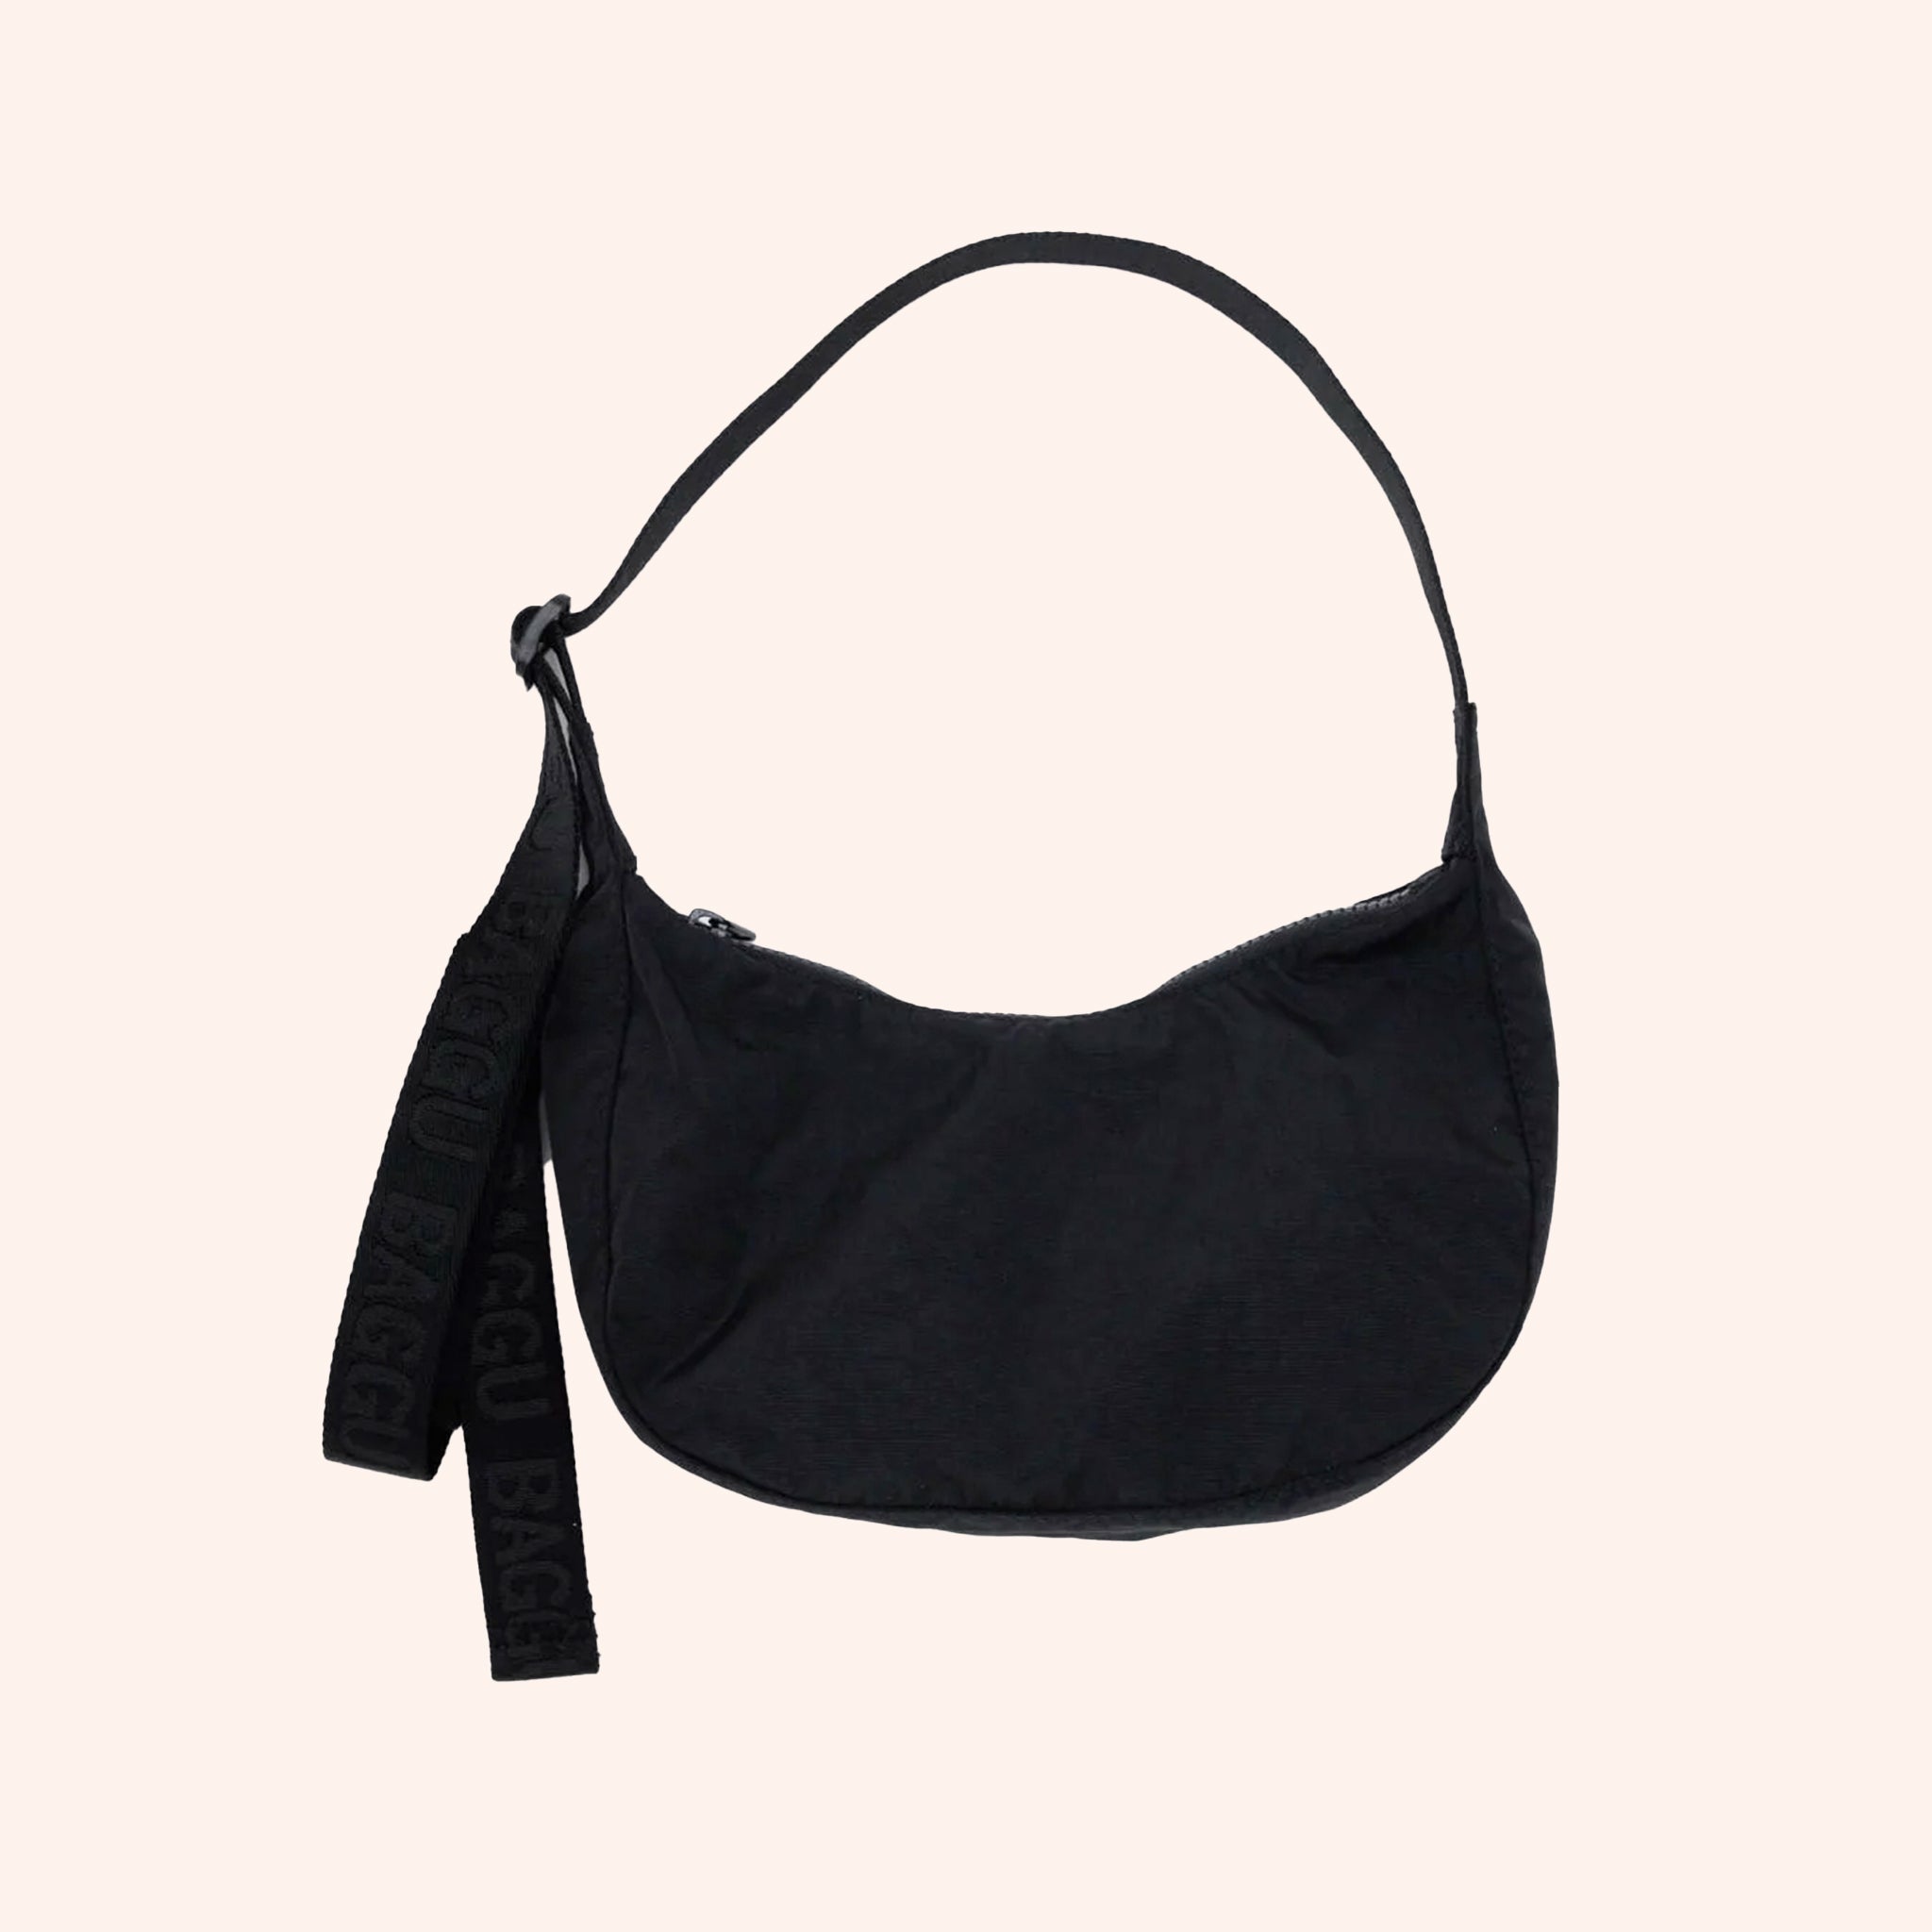 A small crescent shaped nylon shoulder bag with an adjustable strap to make it crossbody. 